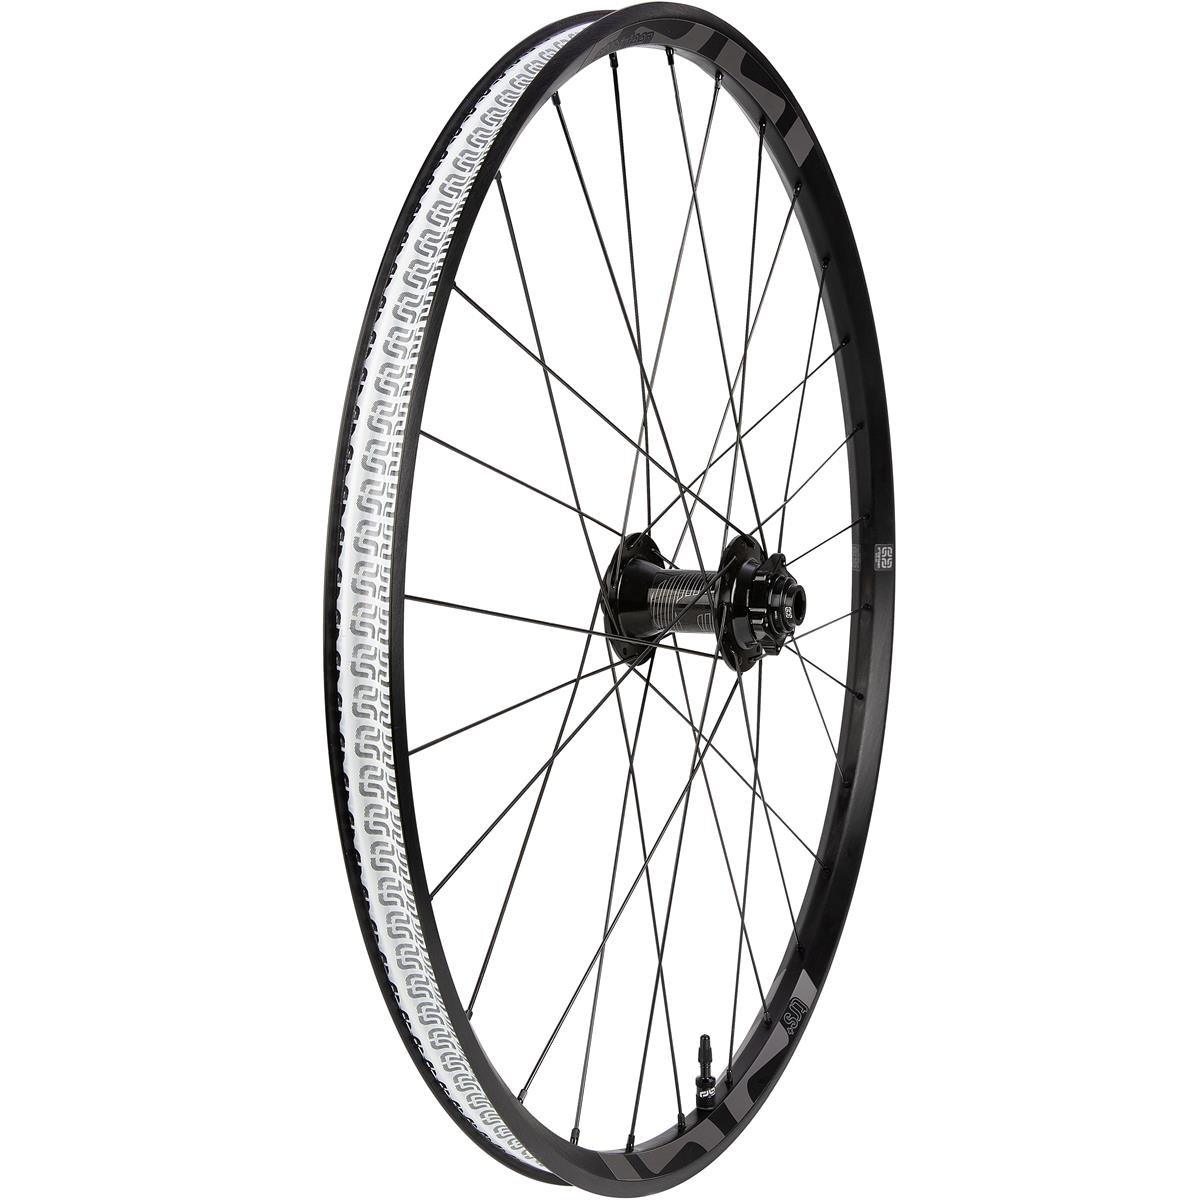 E*thirteen Wheel TRS Trail+ Front, 27.5 Inches, 110x15mm, Boost, 6 Holes, 27 mm Inner Width